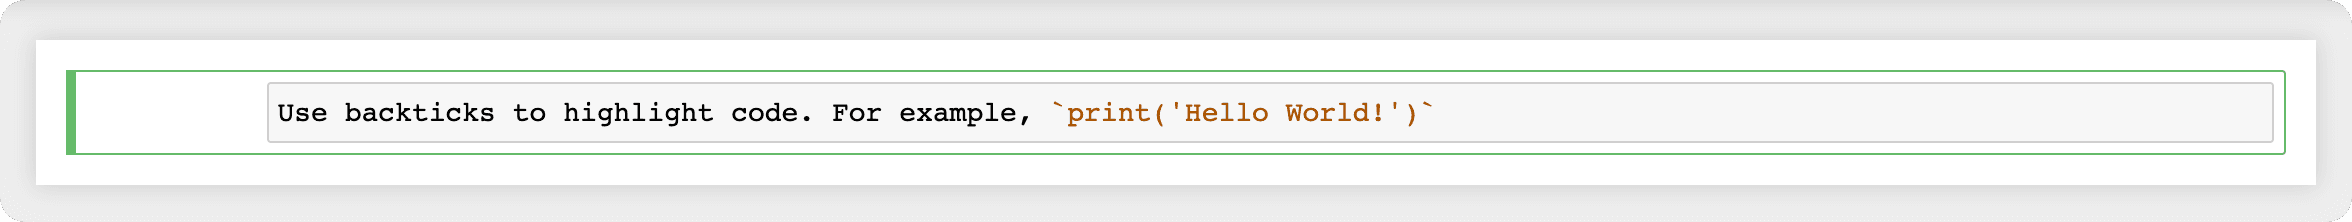 Highlighting text with inline code